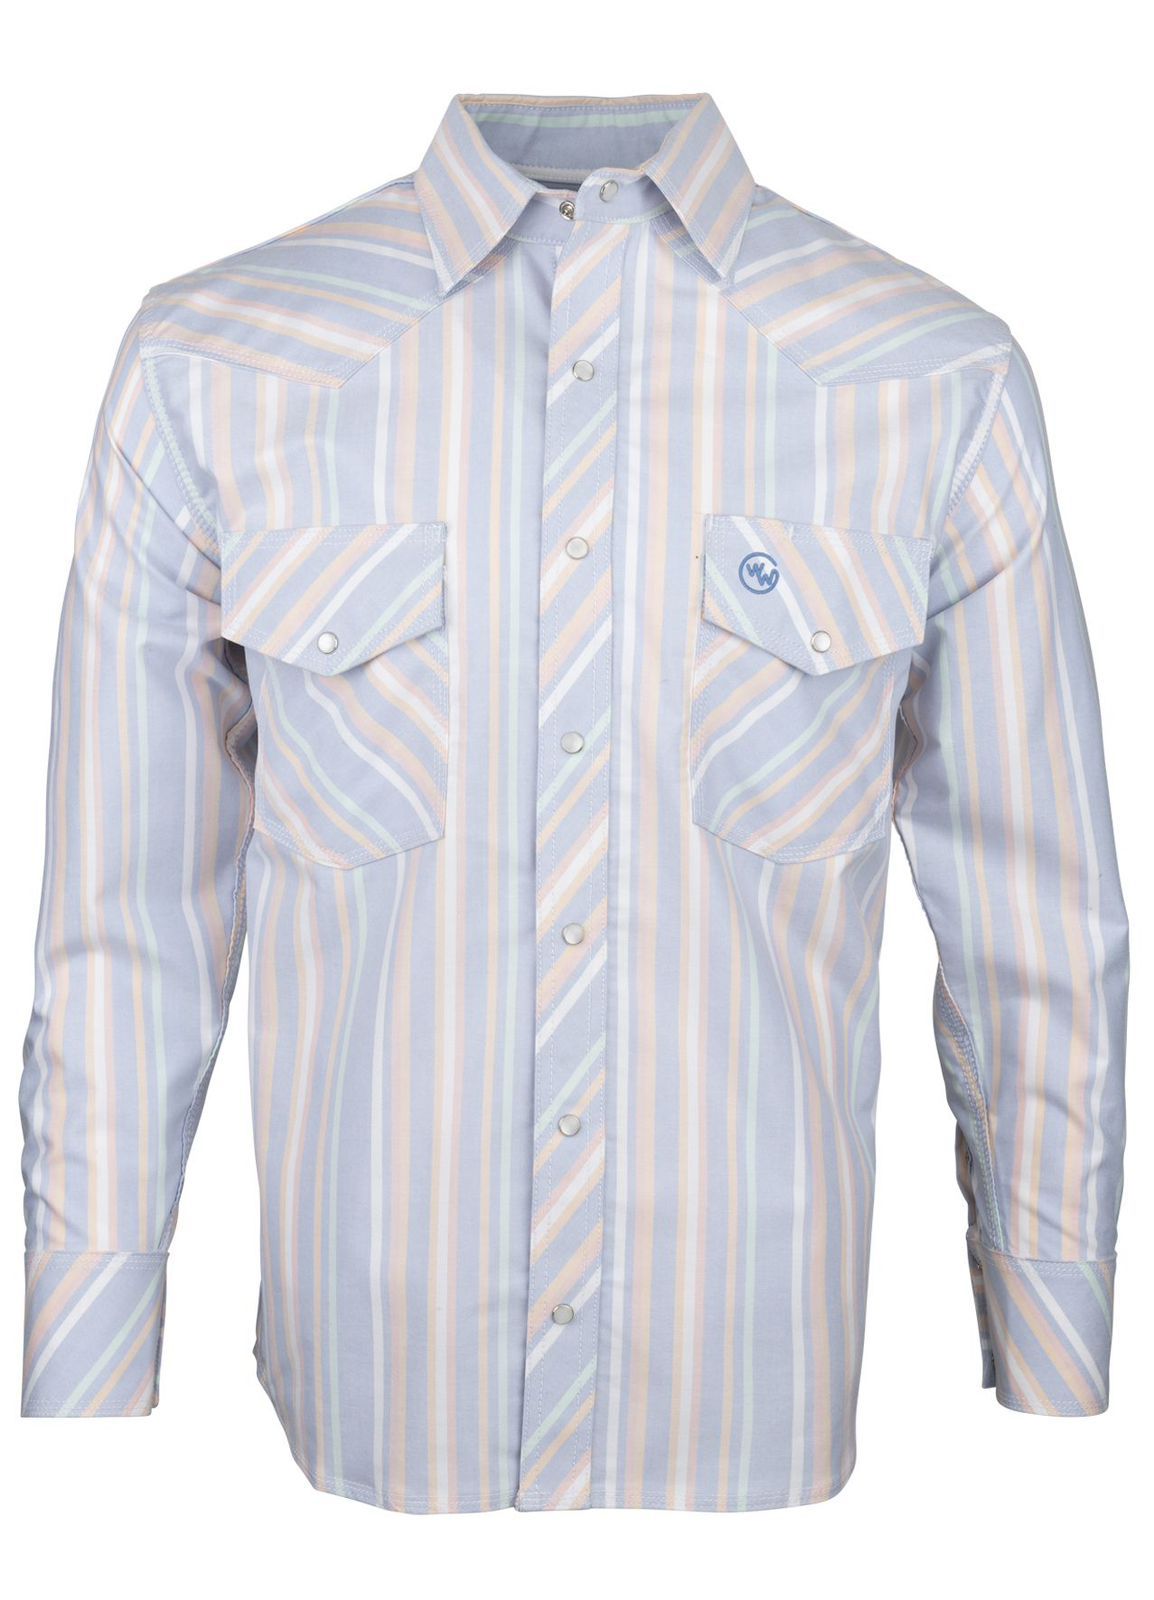 Image of WW Triple Stitched Cotton Striped Shirts (Non FR)